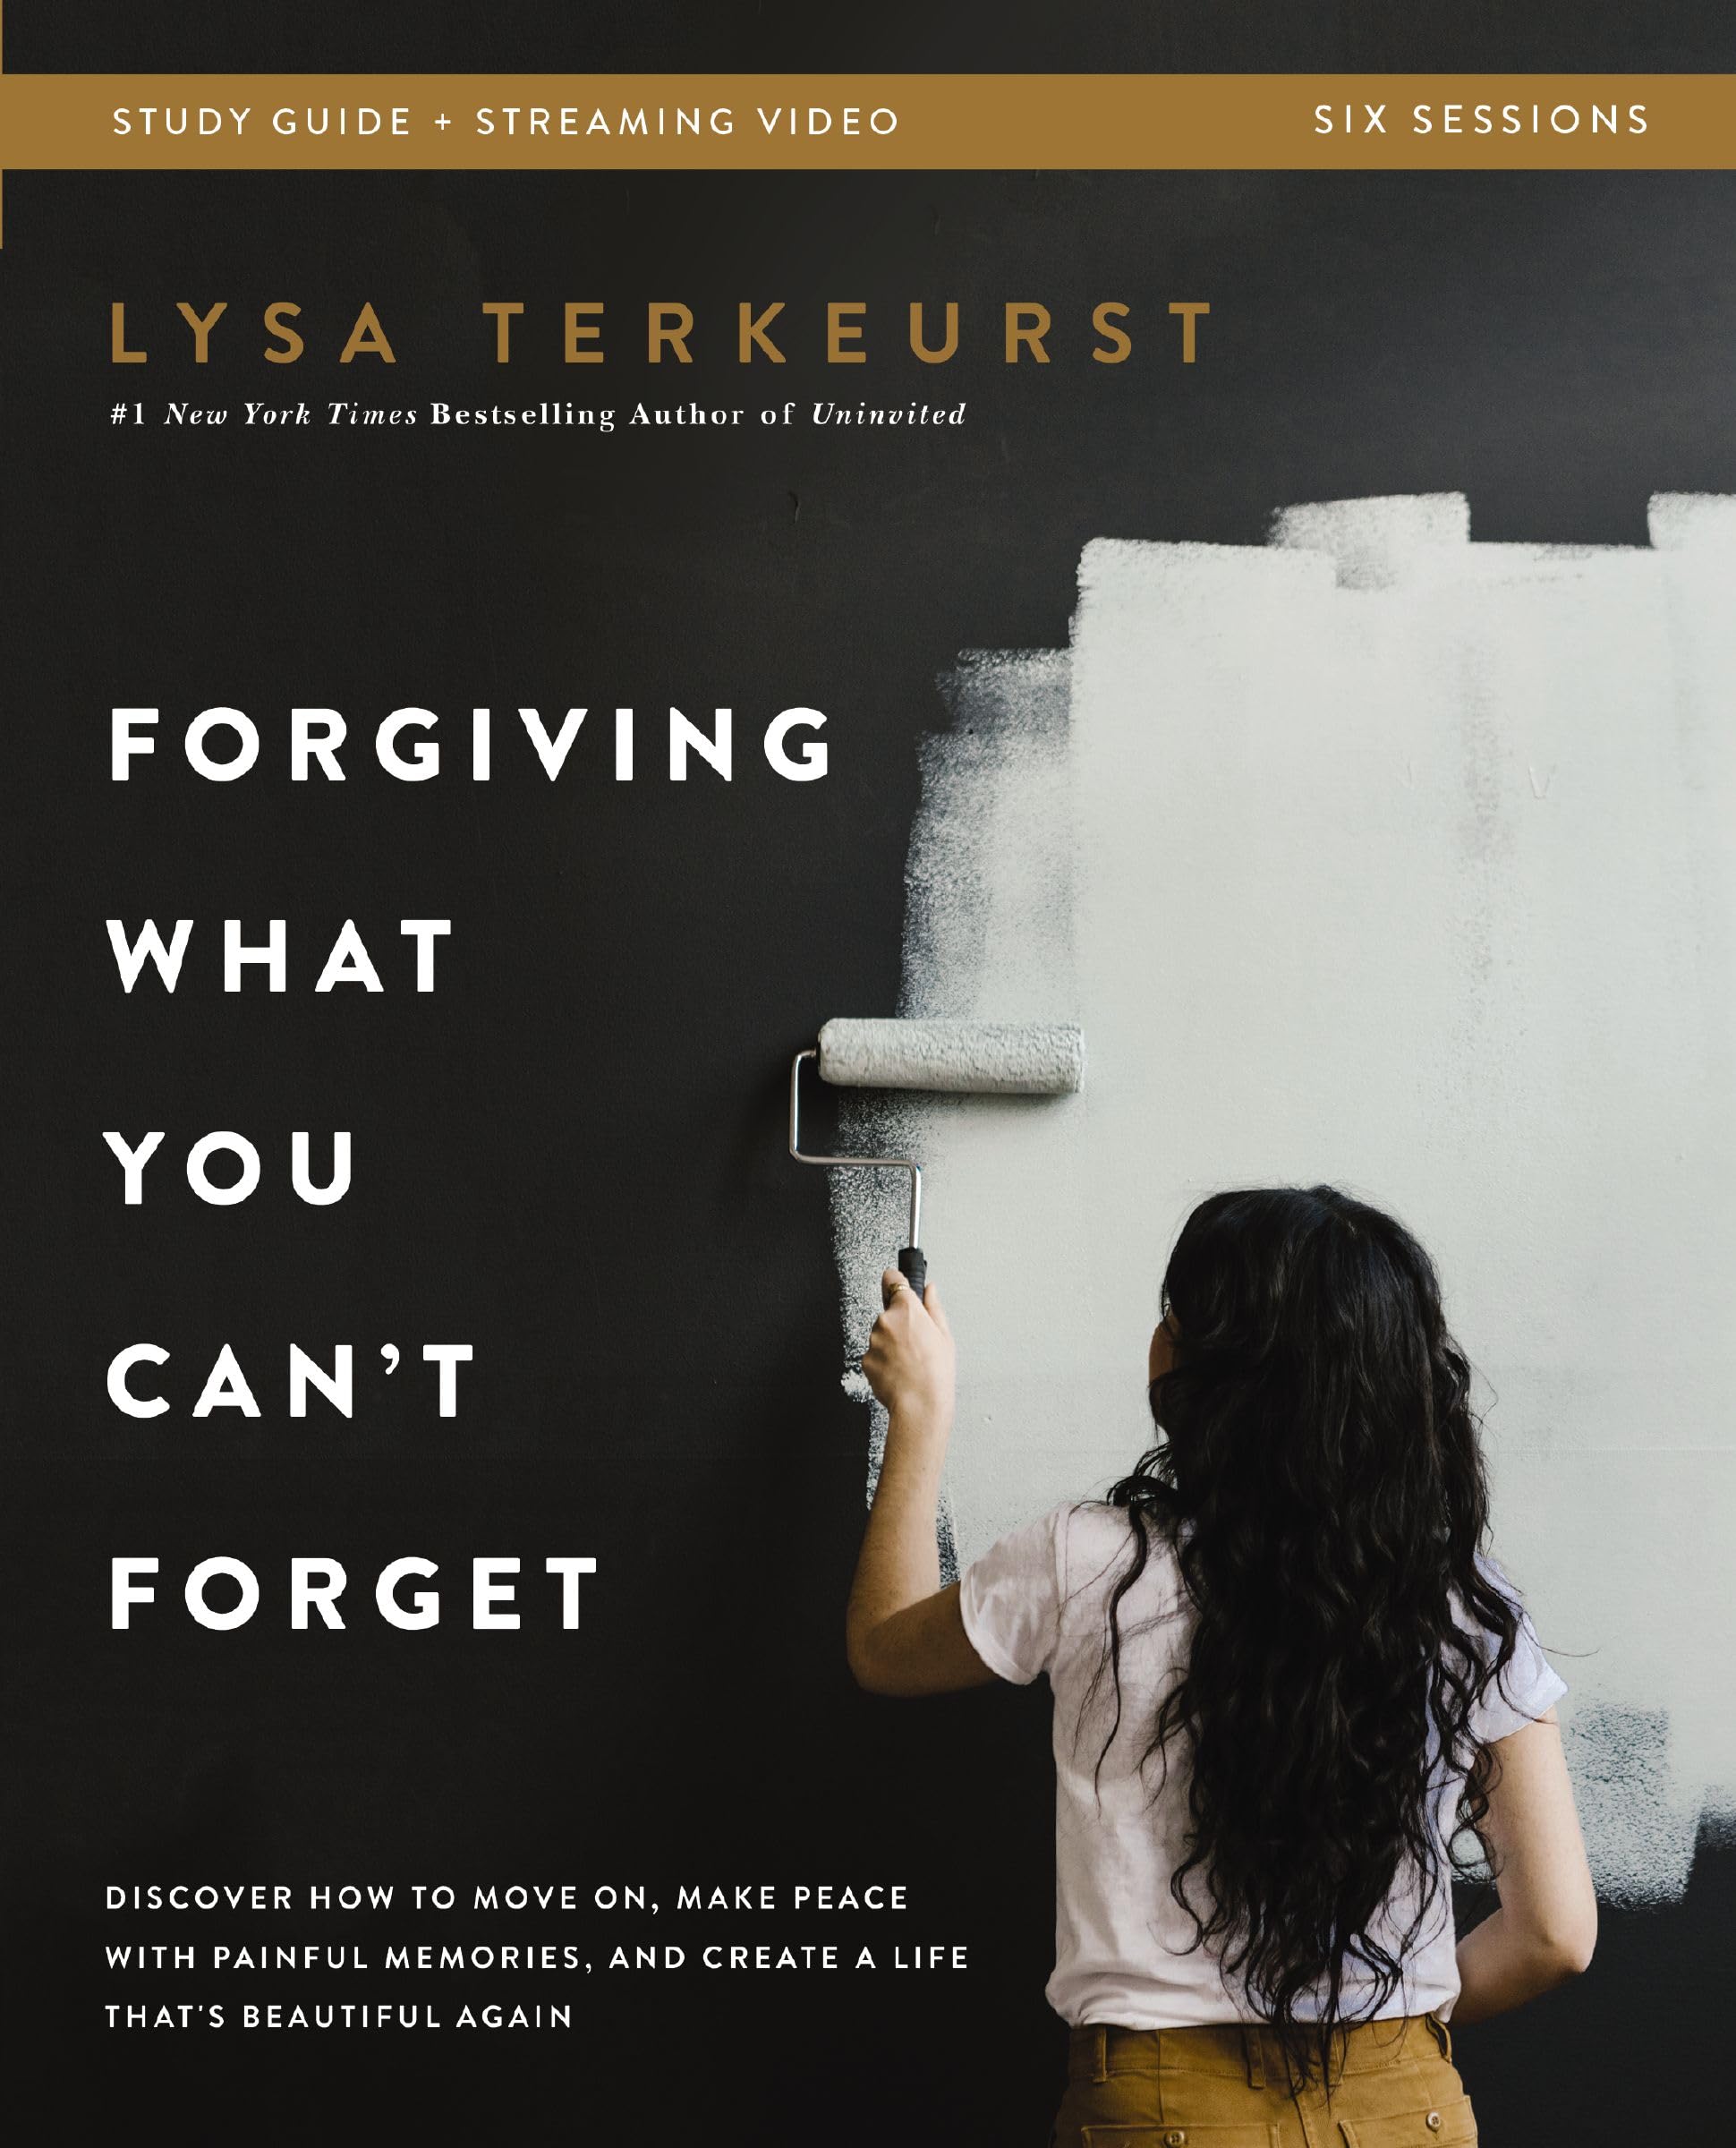 Forgiving What You Can't Forget Bible Study Guide Plus Streaming Video: Discover How to Move On, Make Peace with Painful Memories, and Create a Life T by TerKeurst, Lysa